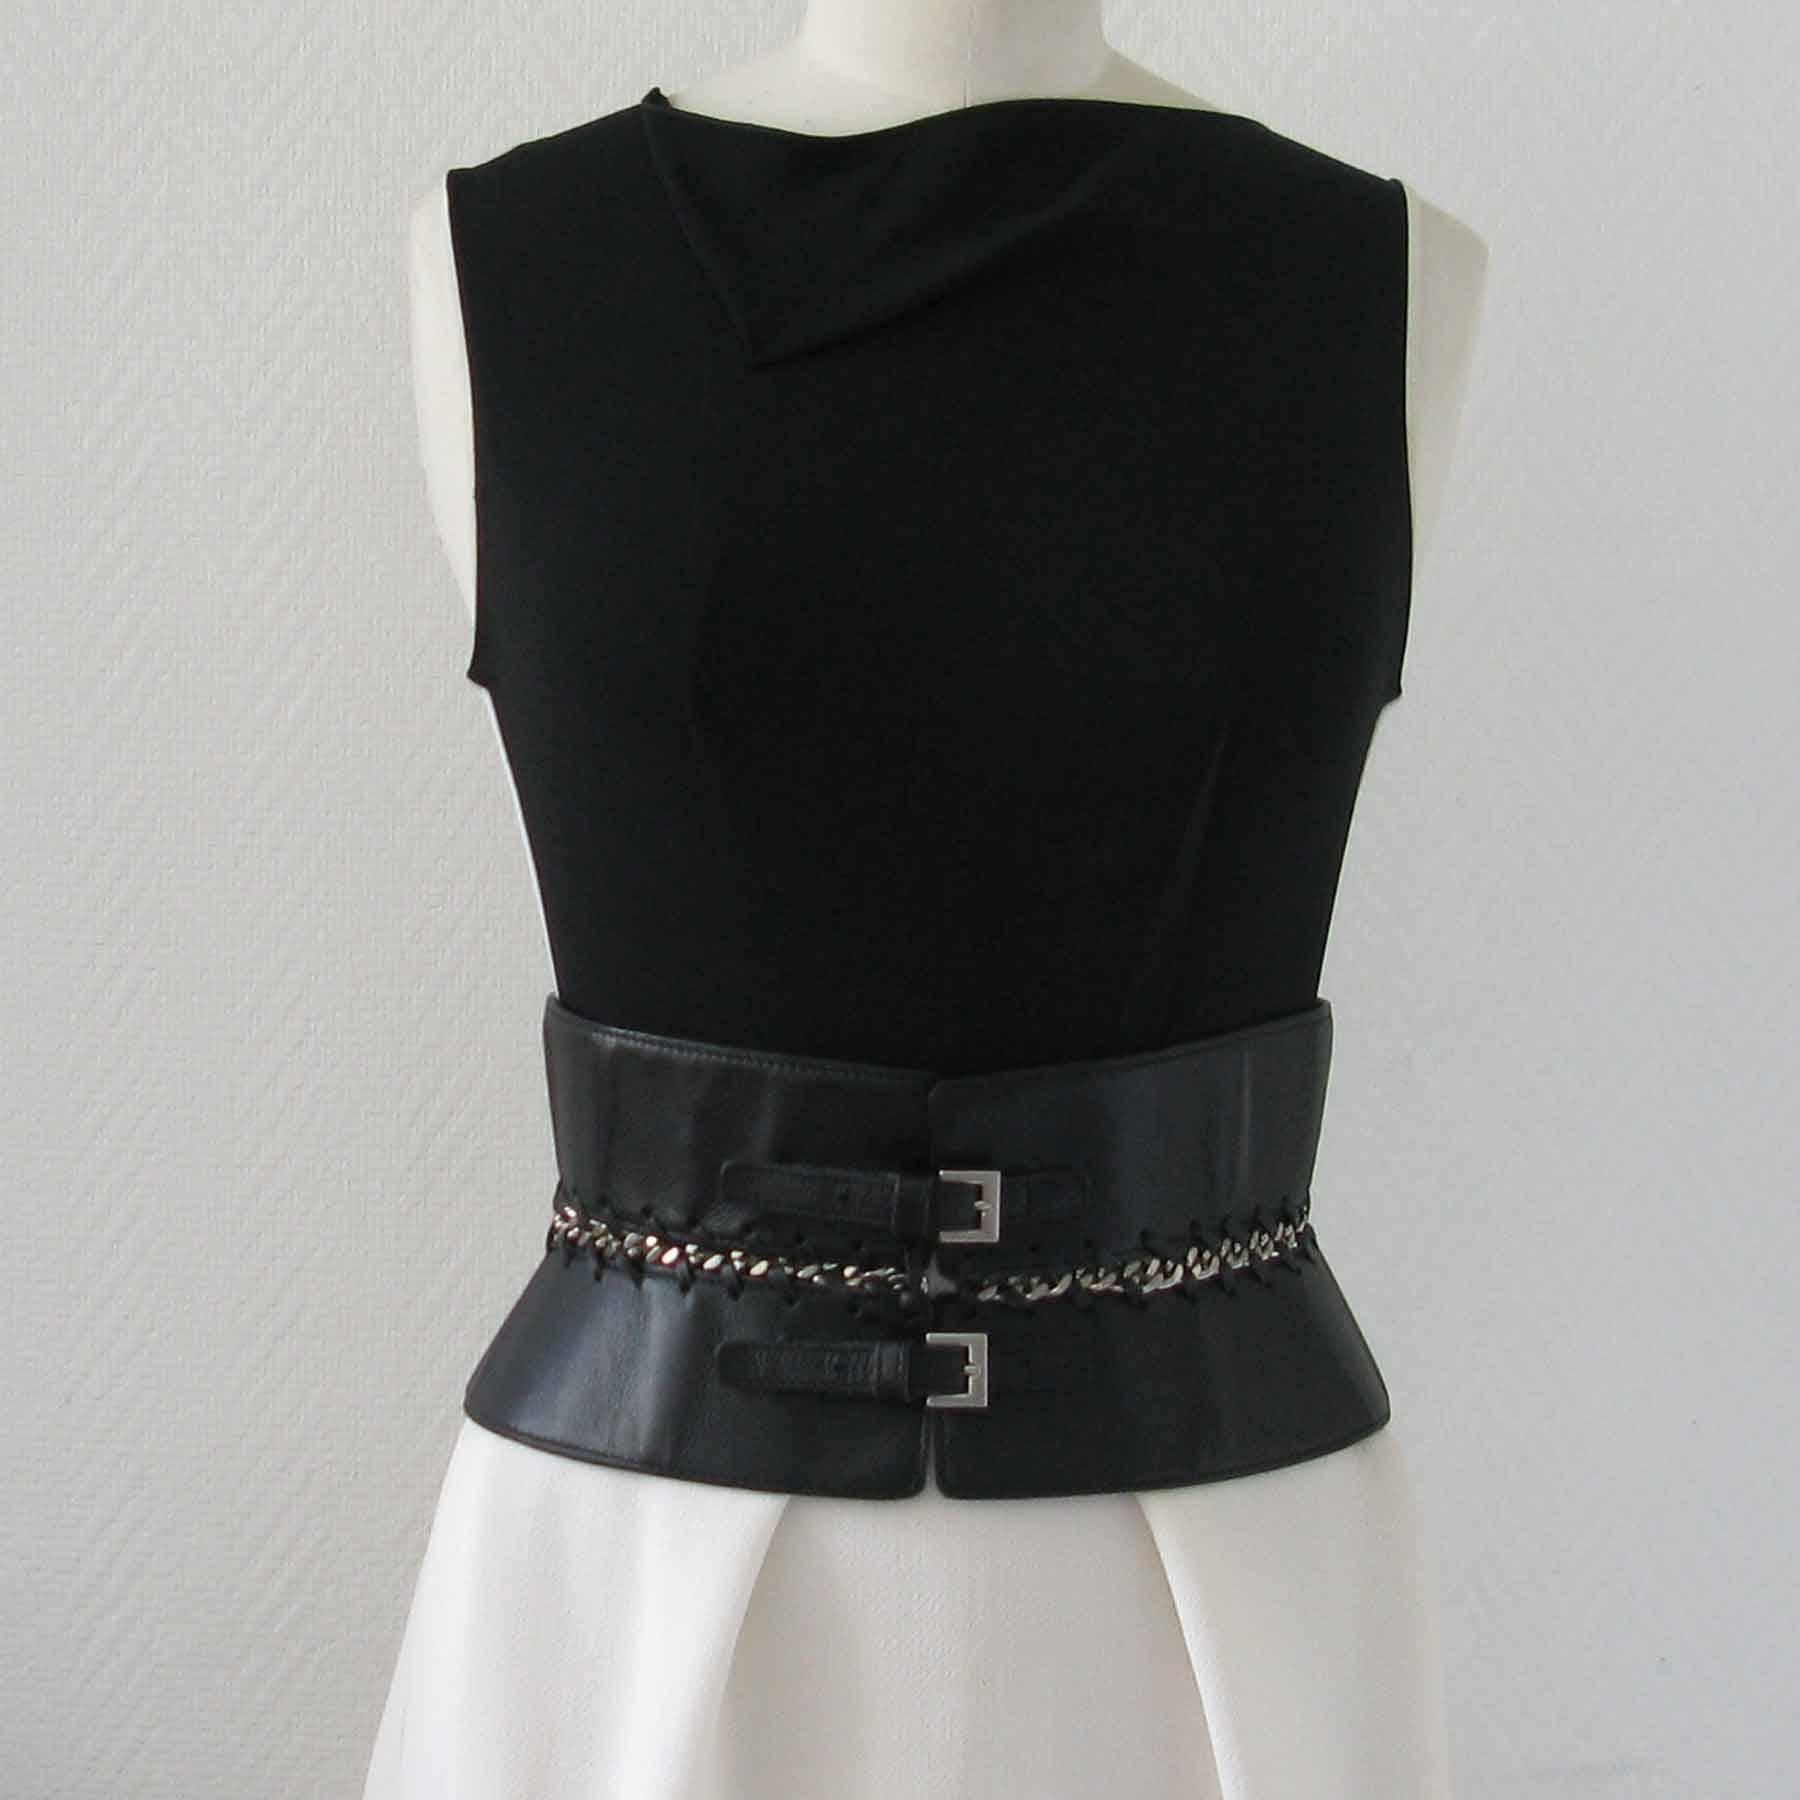 Wide Jean Paul Gaultier belt in black leather with silver chain.

Dimensions:  shortest length: 72 cm

Delivered in a Valois Vintage Paris Dustbag